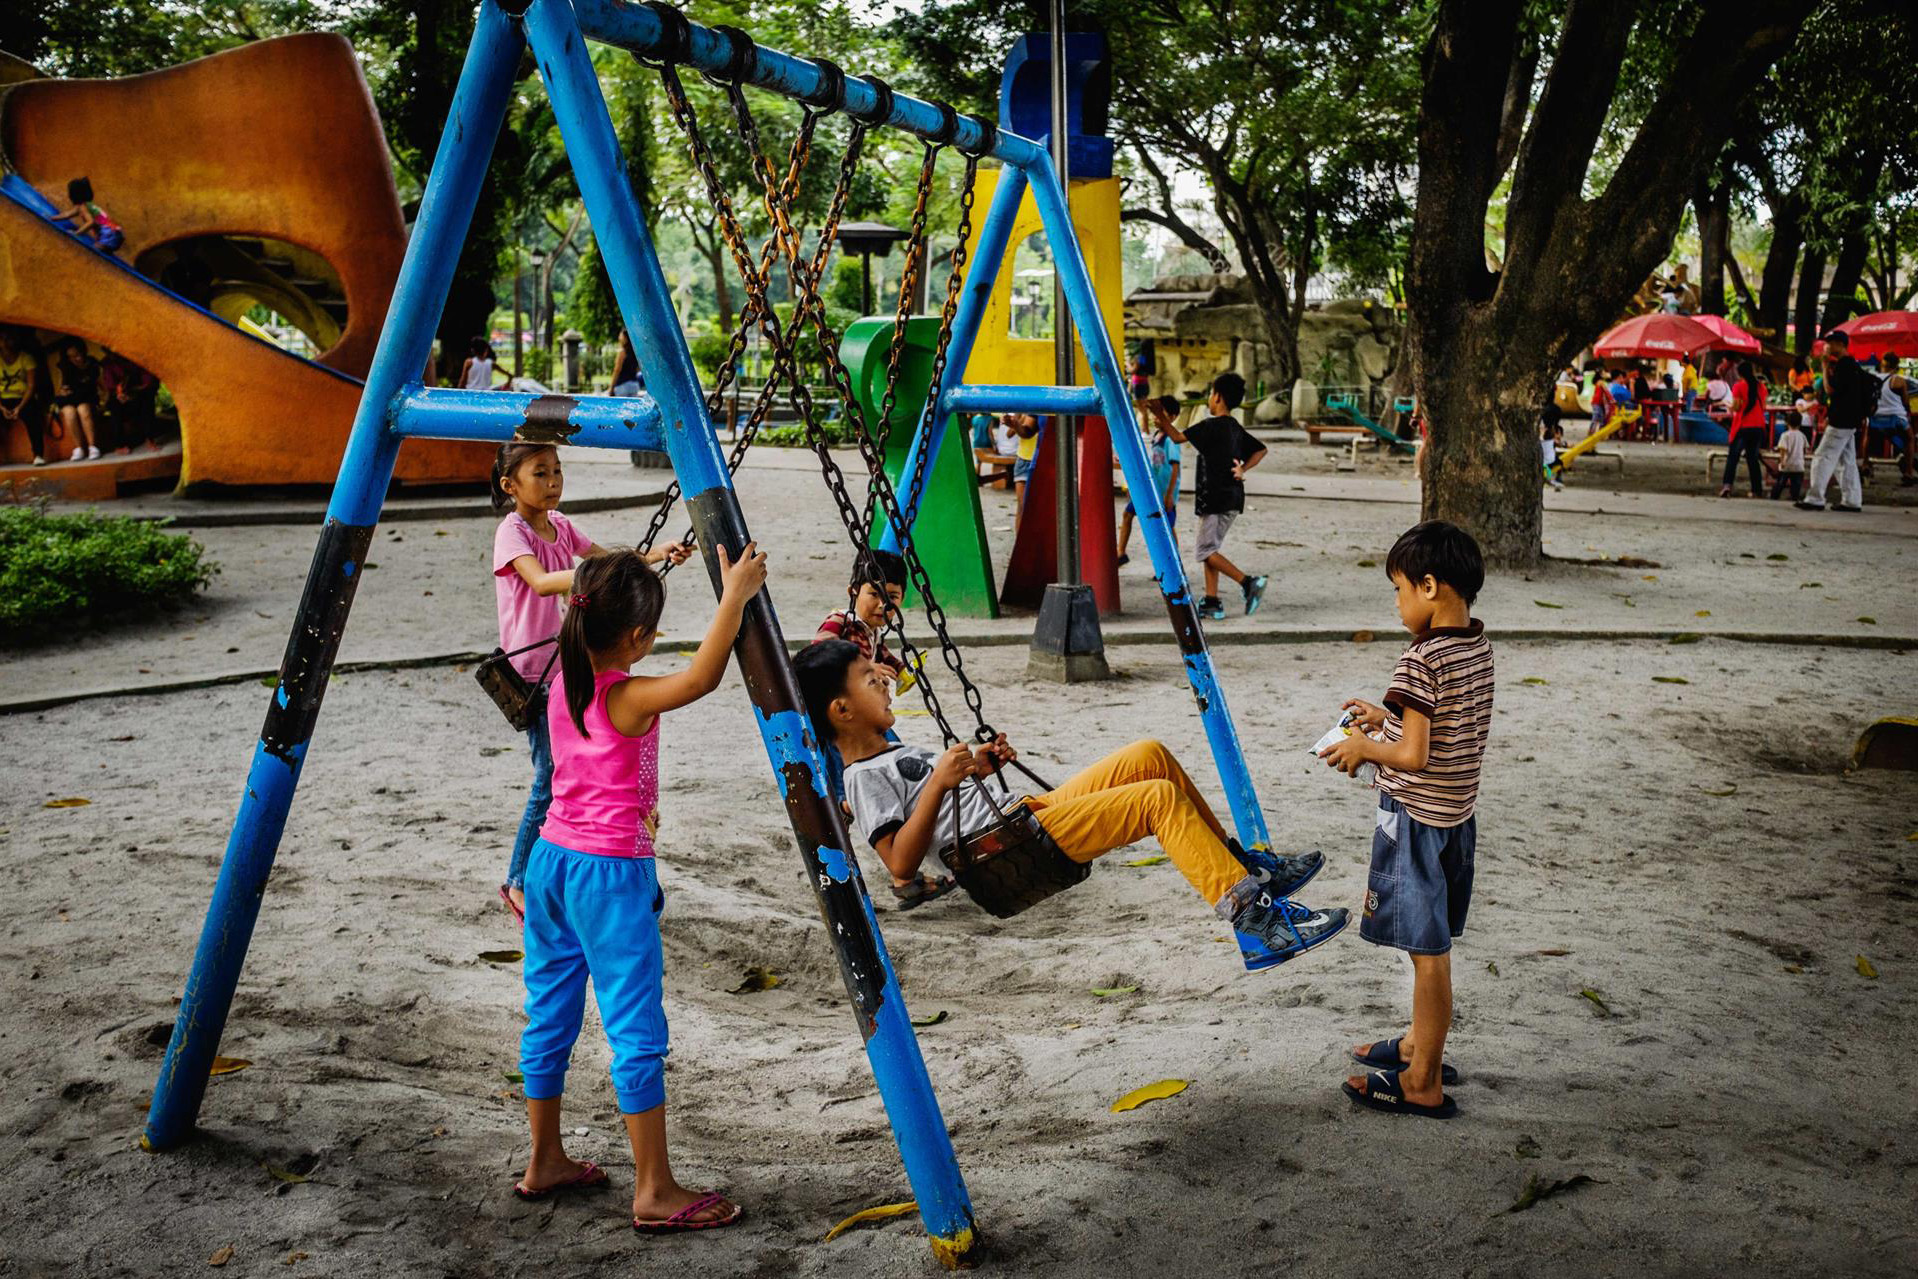 Children playing on swings at a playground.